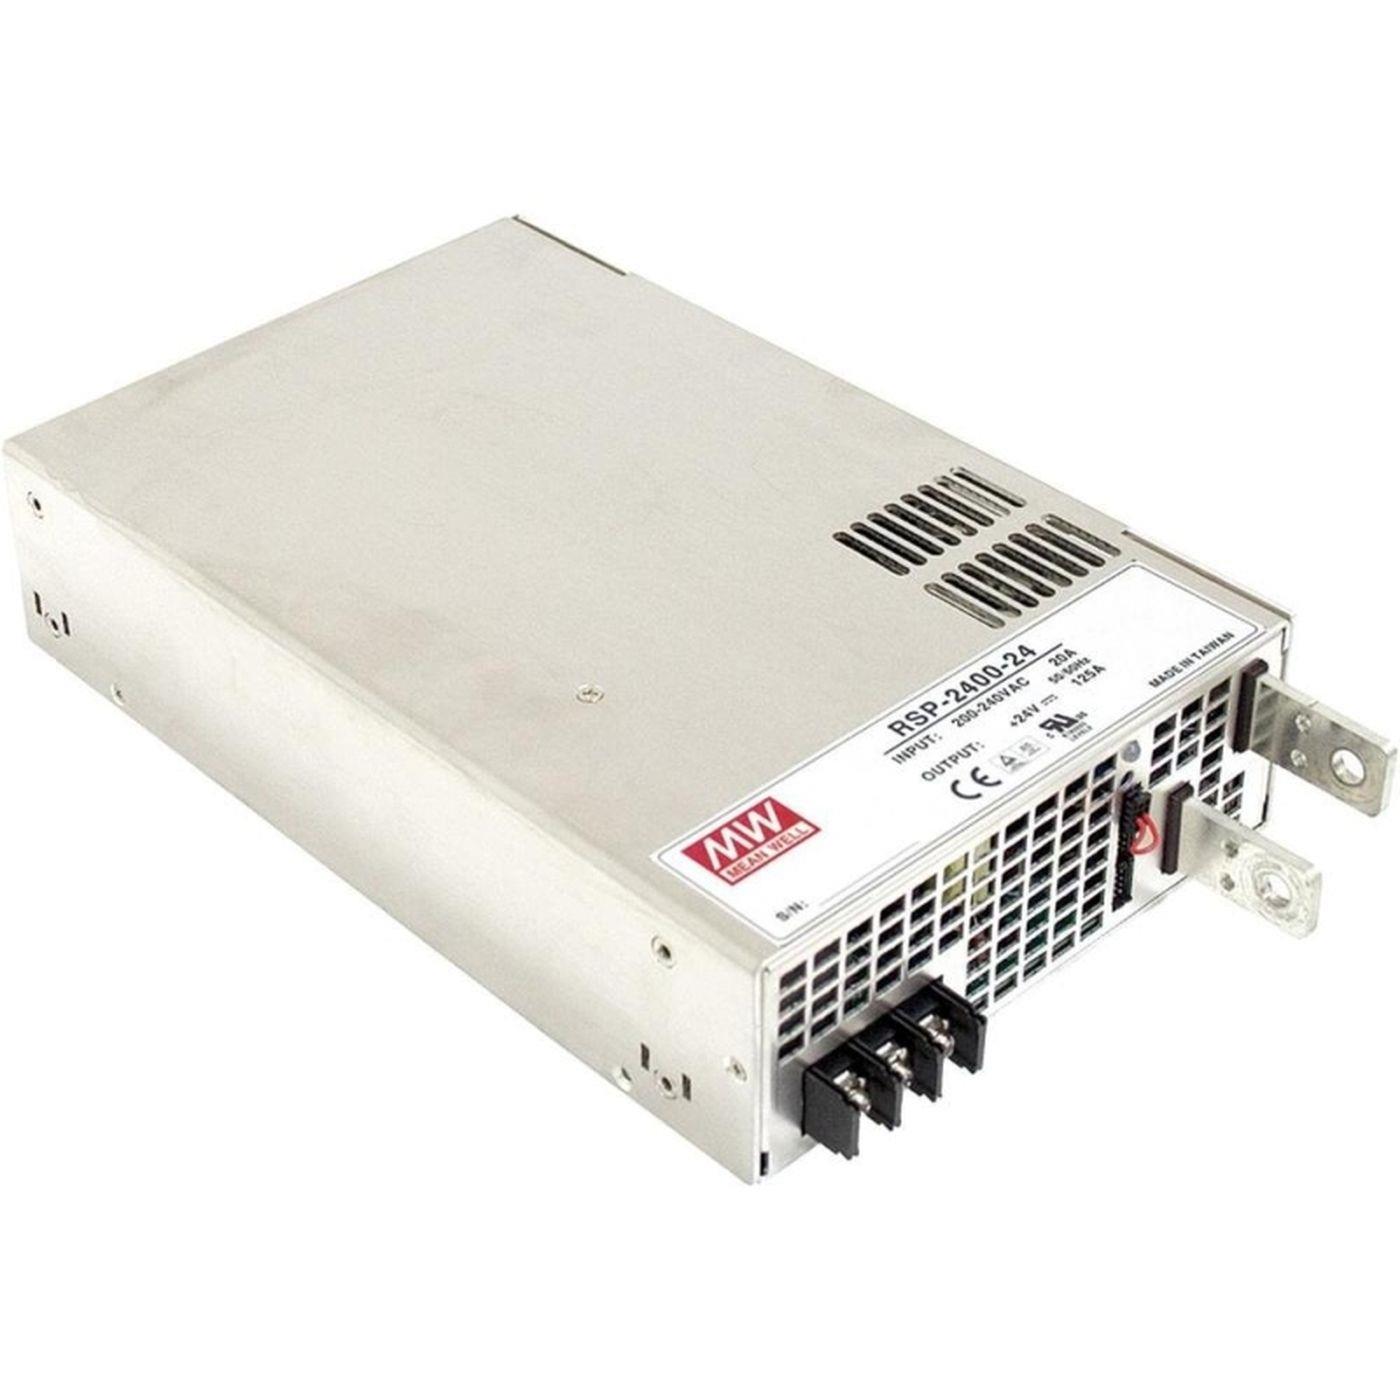 RSP-2400-24 2400W 24V 100A Industrial power supply